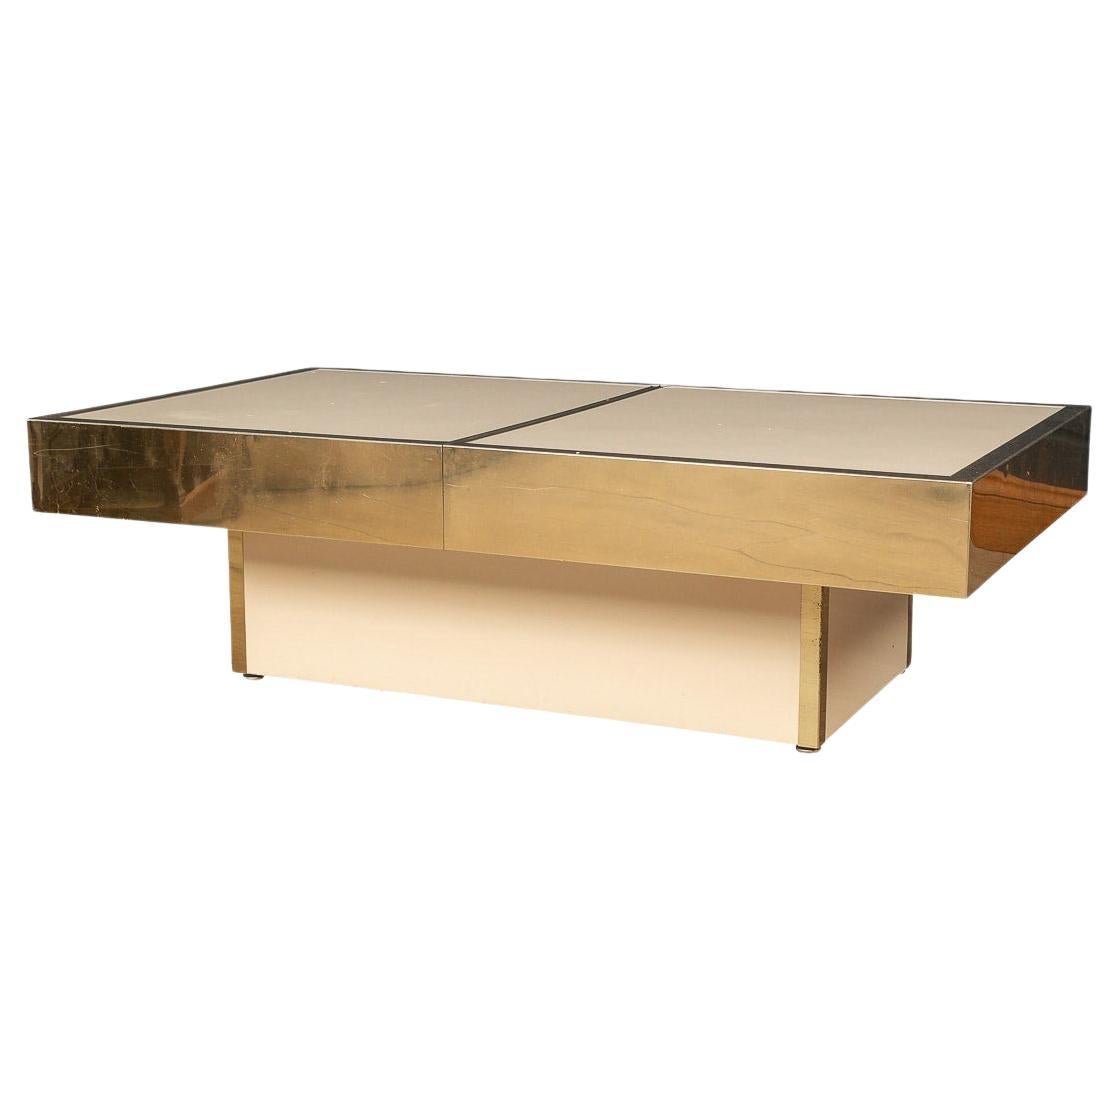 20th Century Italian Brass Top Coffee Table by Willy Rizzo, circa 1970